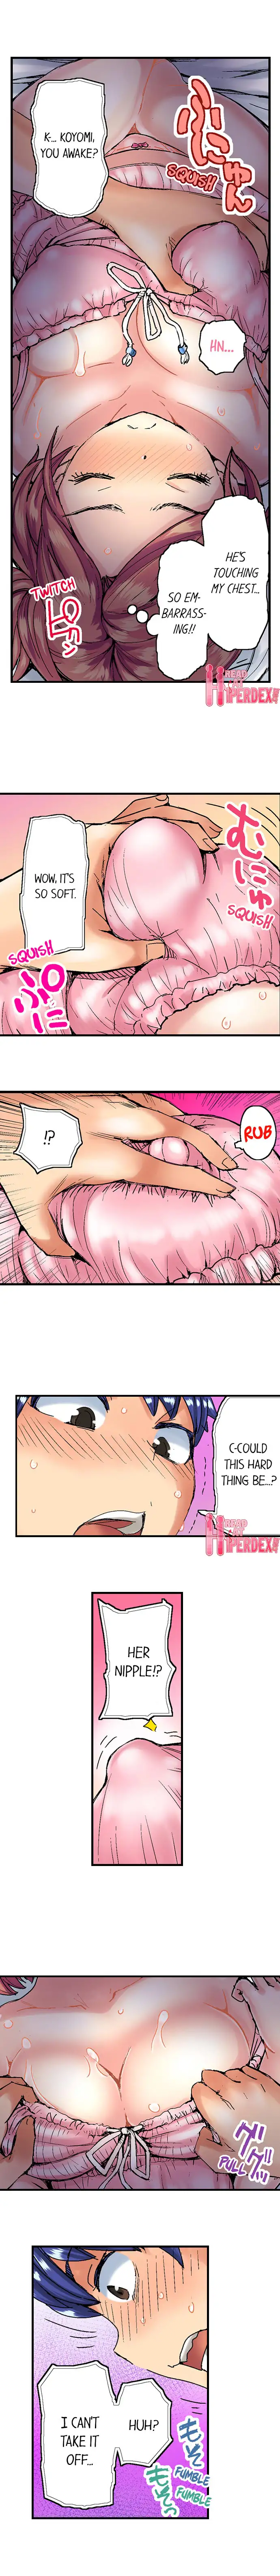 Taking a Hot Tanned Chick’s Virginity - Chapter 2 Page 4